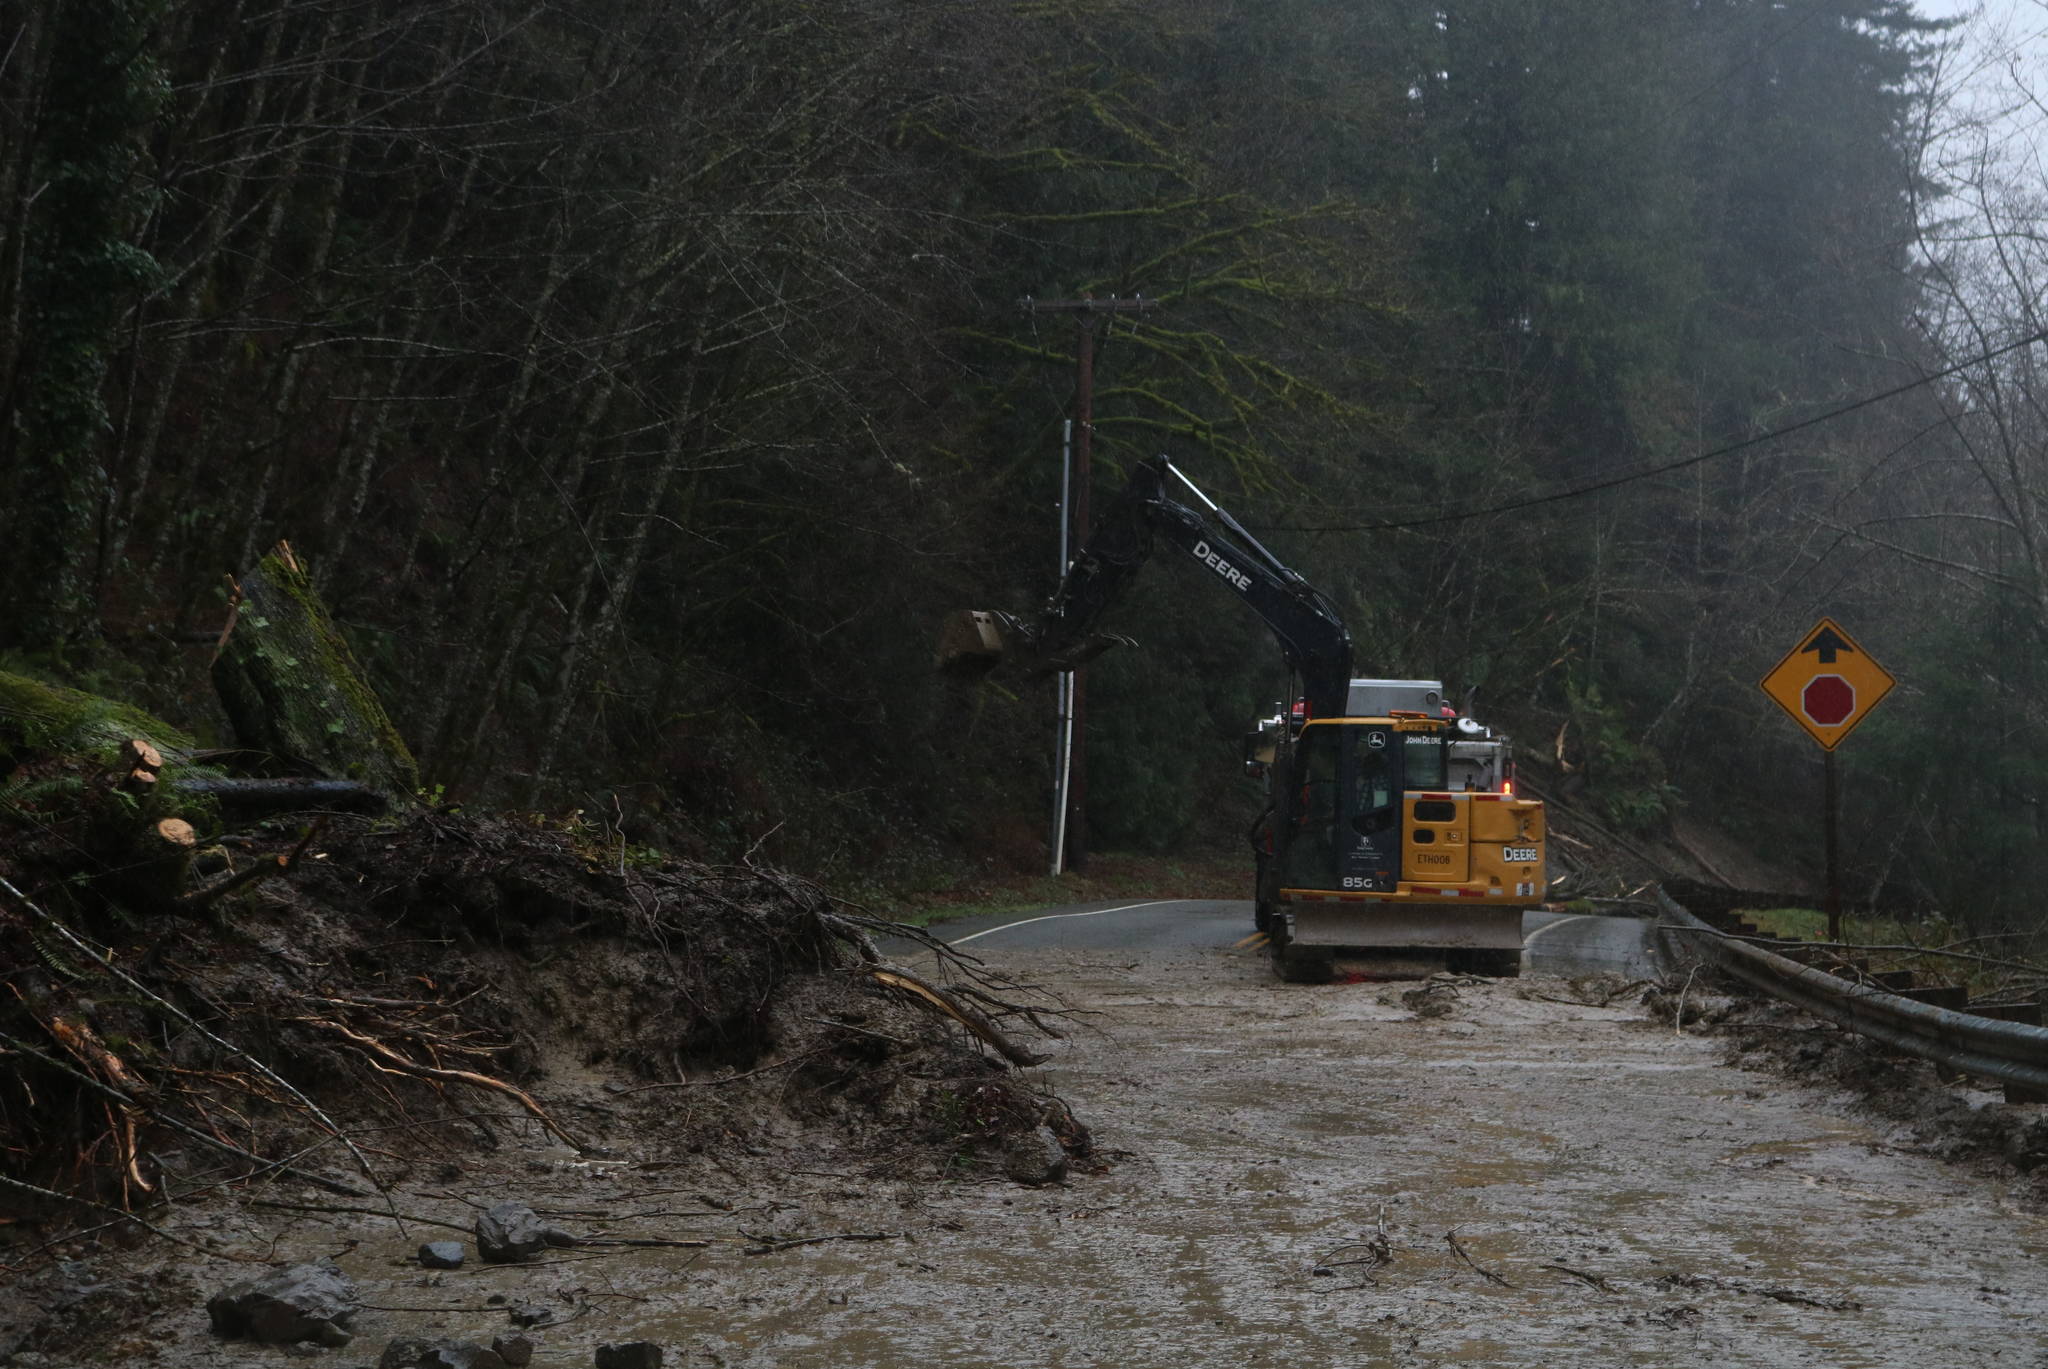 A King County work crew clears a road near Preston on Feb. 7, 2020. Heavy rains appear to have caused multiple landslides along the road. Aaron Kunkler/staff photo